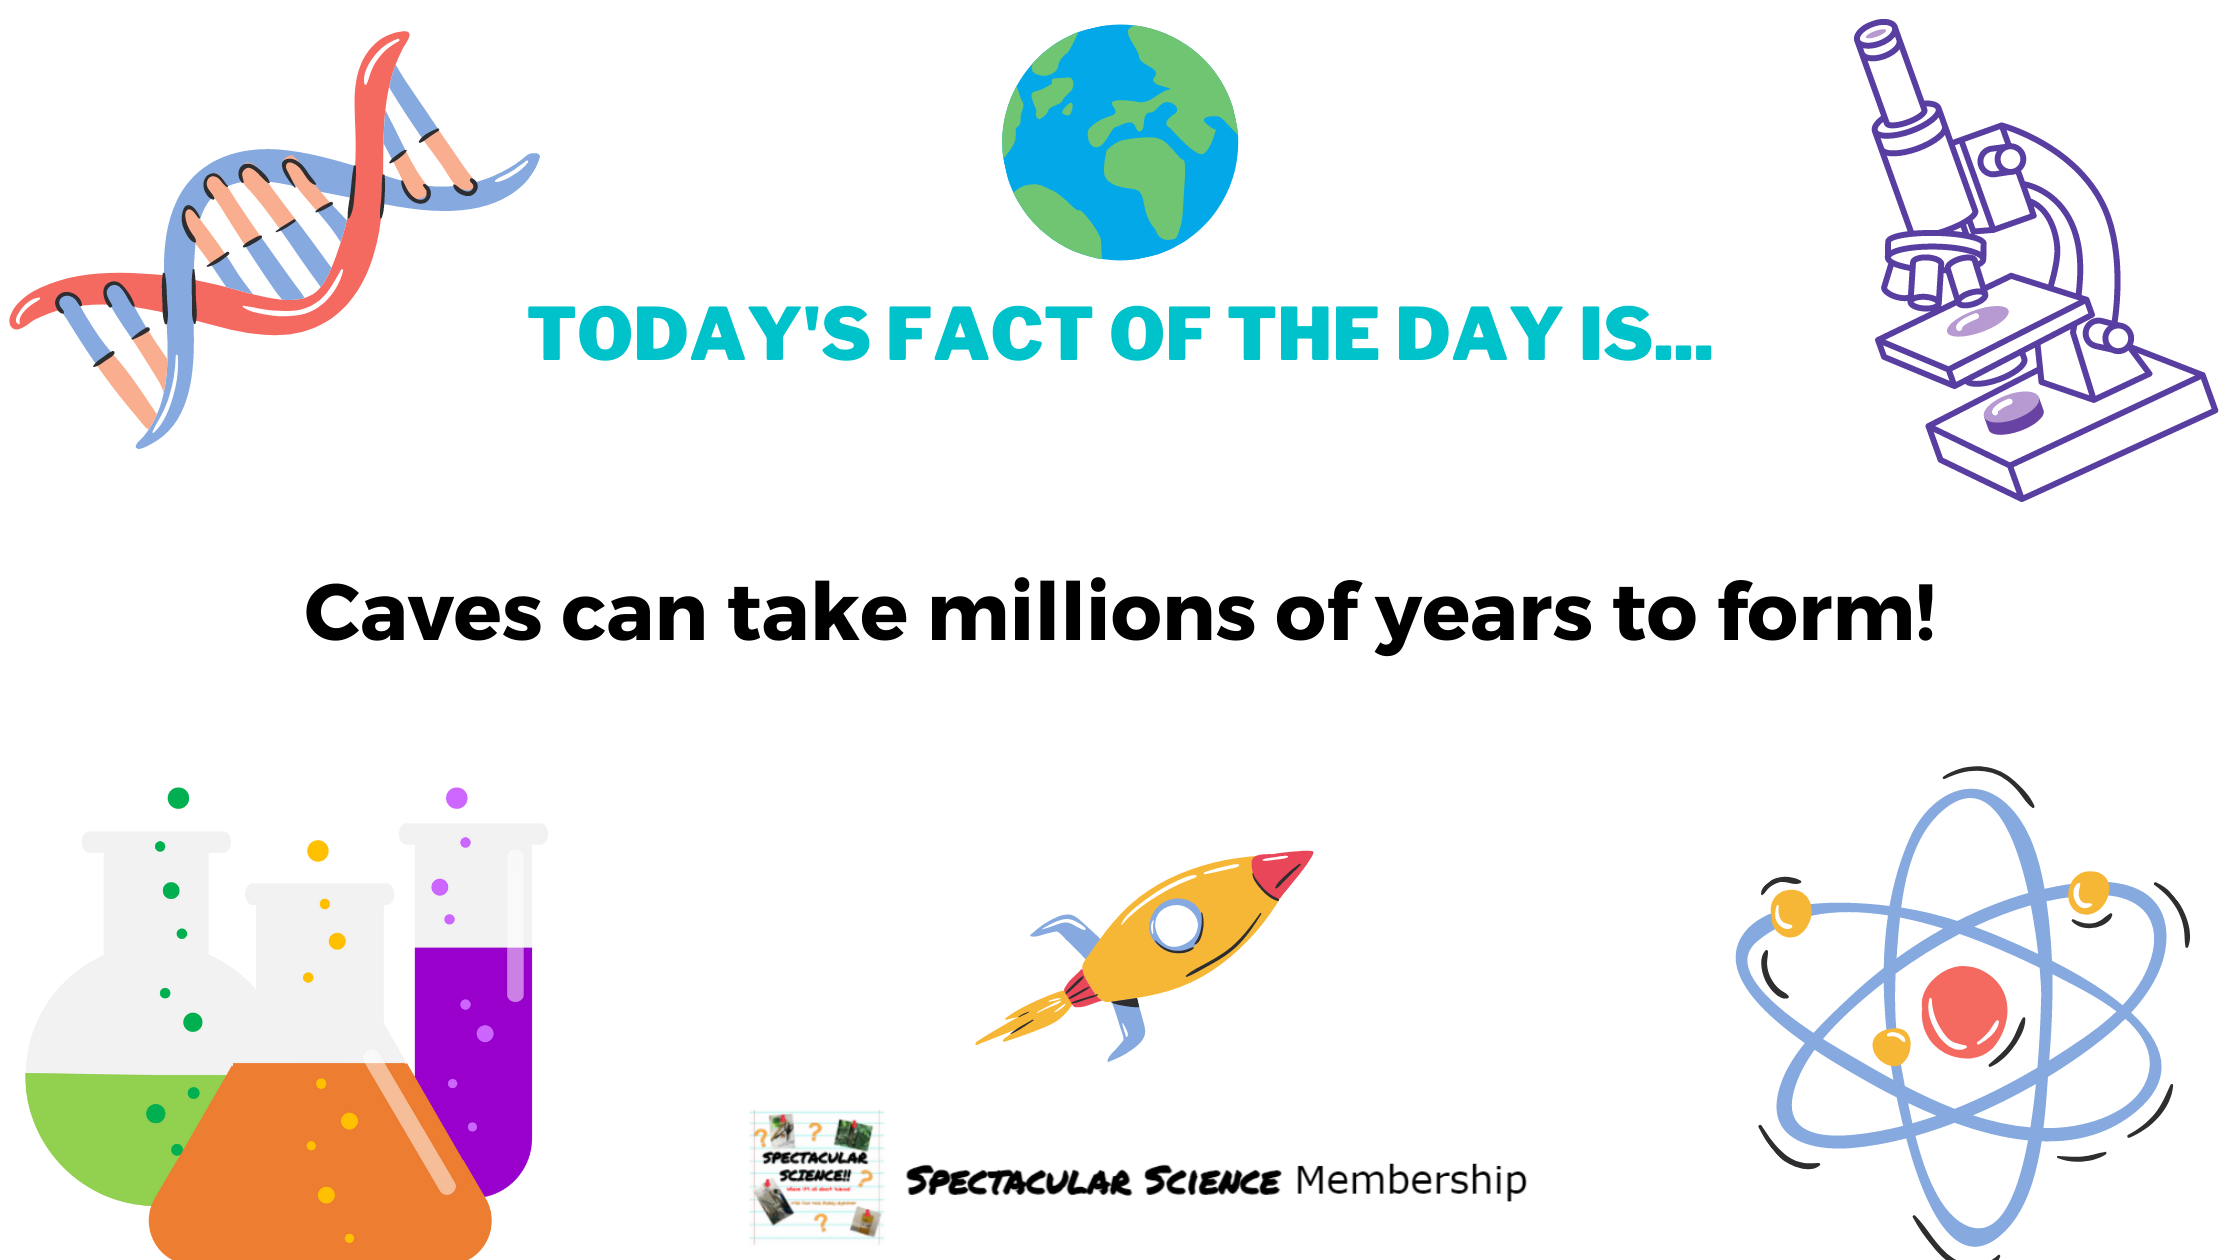 Fact of the Day Image Feb. 15th